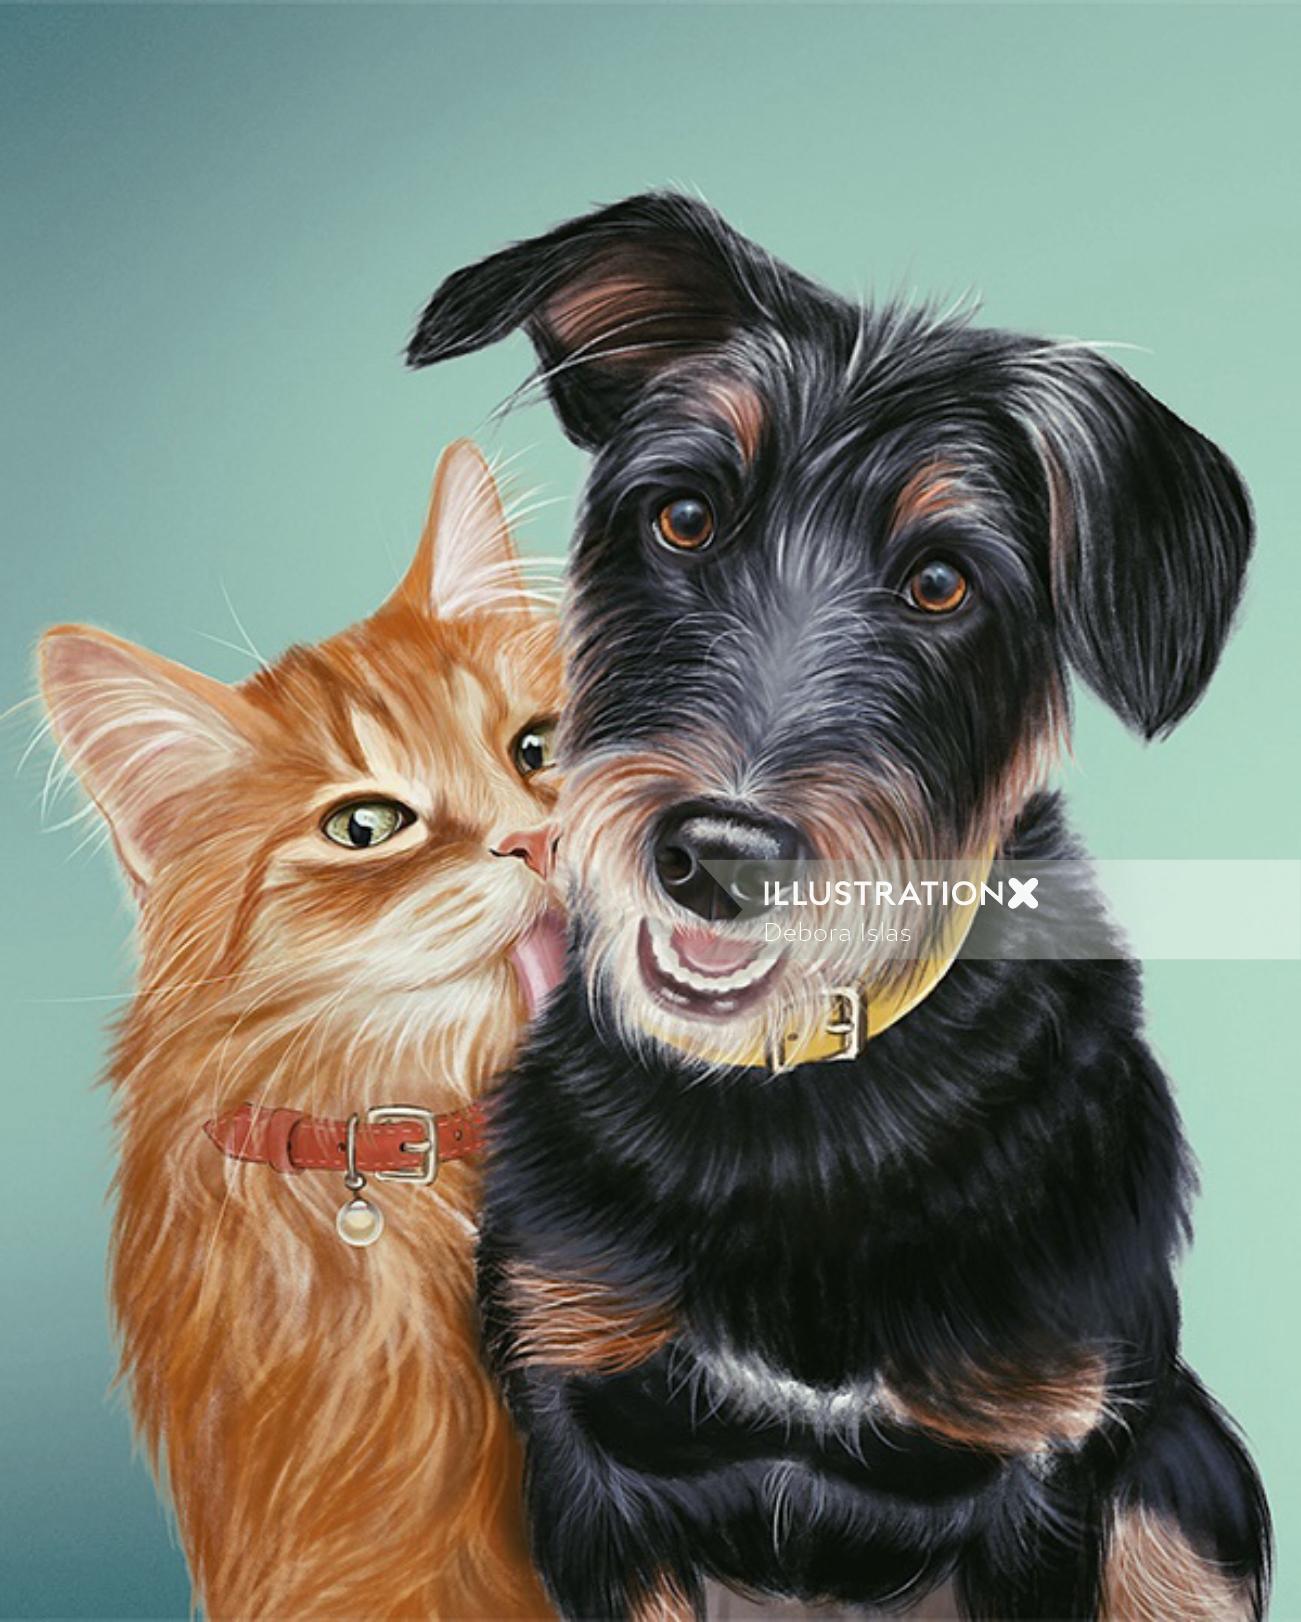 Digital painting of a Dog and Cat friendship